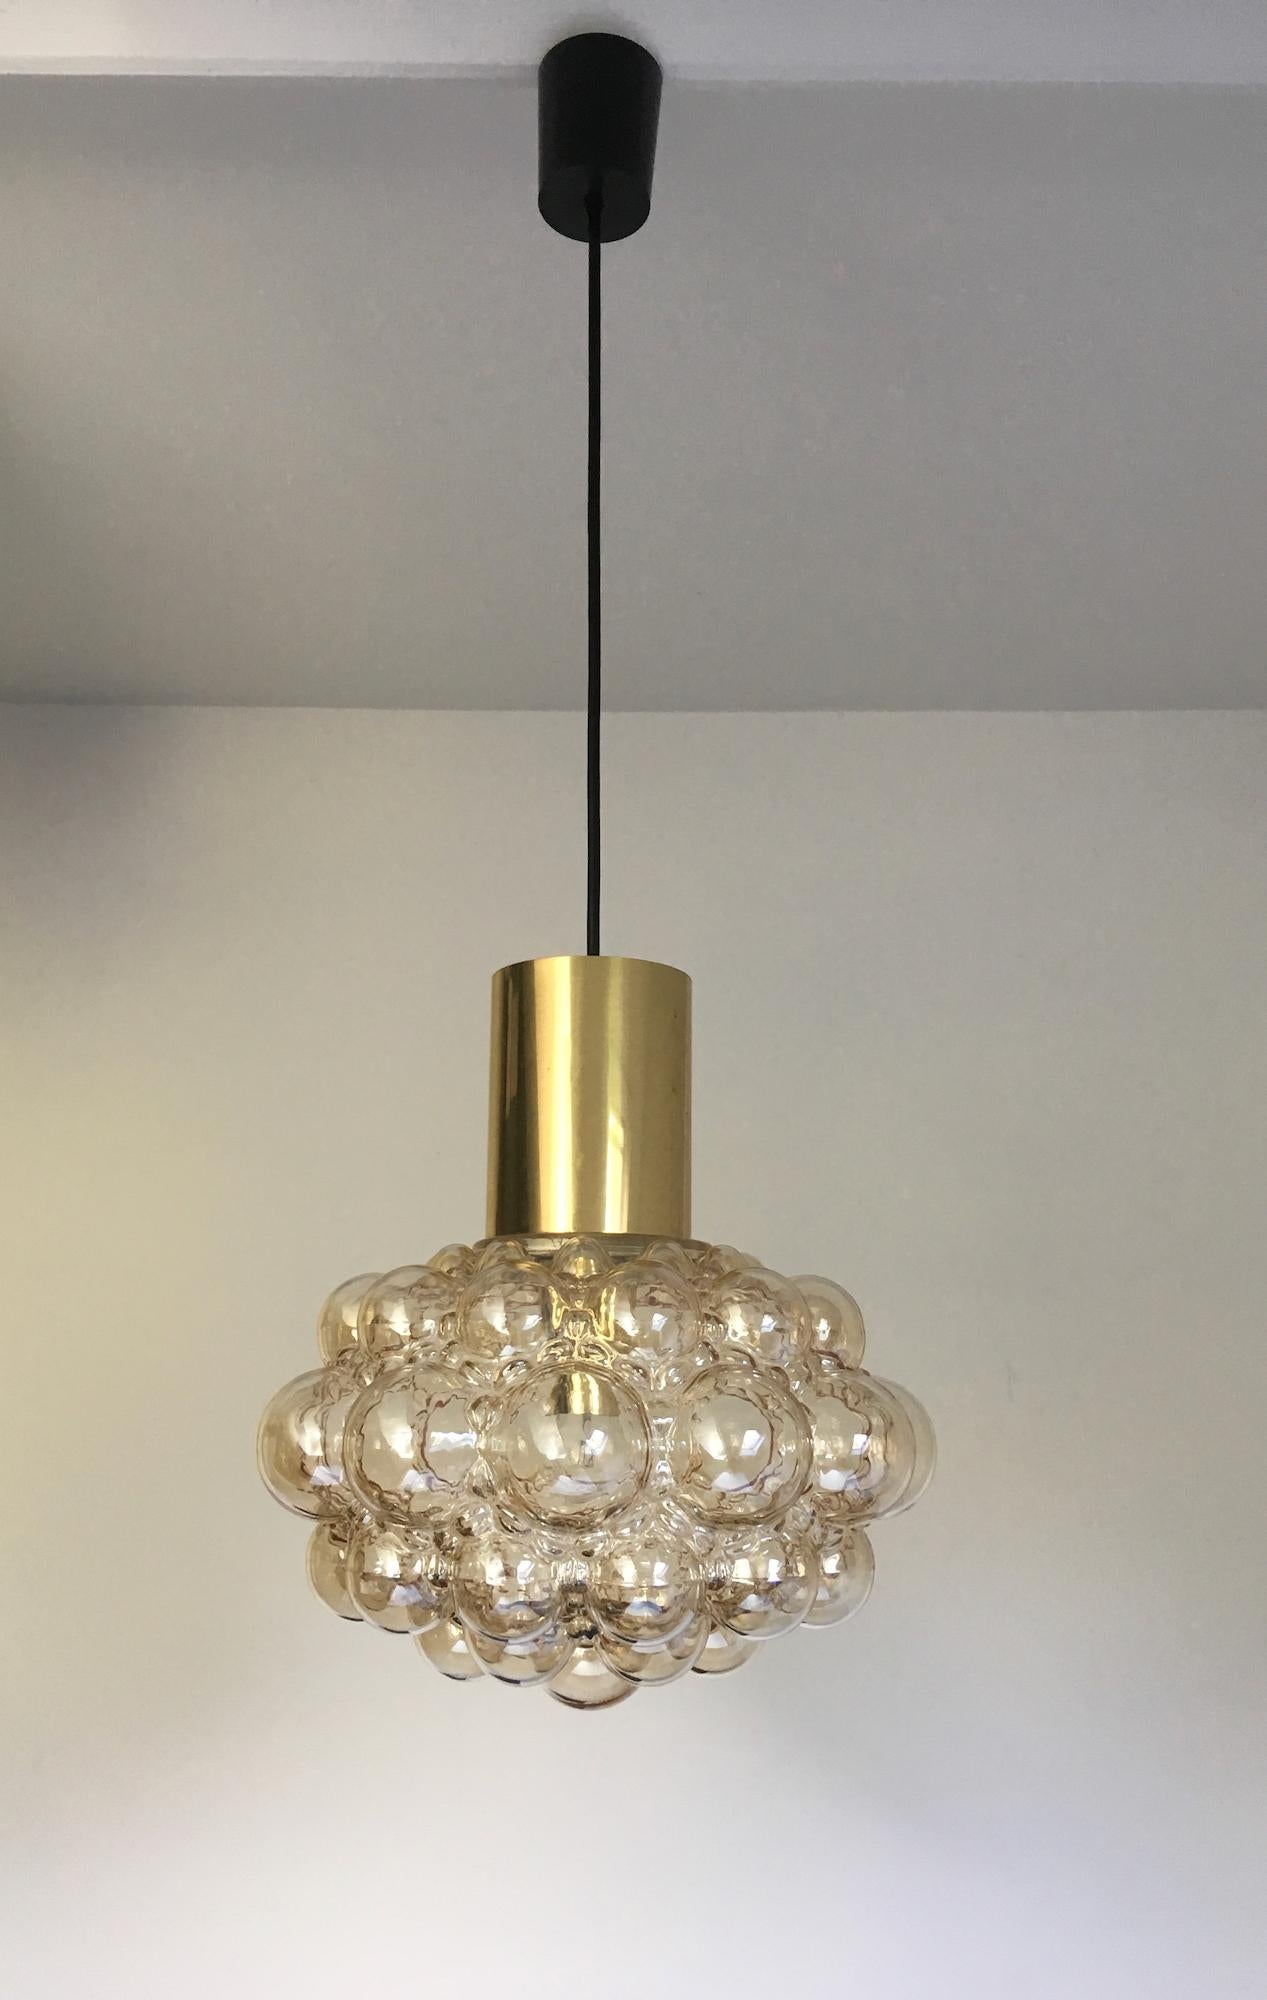 Set of two midcentury glass pendant bubble lights by Finnish designer Helena Tynell for Glashütte Limburg of Germany. 

These attractive fixtures consist of a glass shade of pale amber, topped with a brass tube. The brass simply rests on the